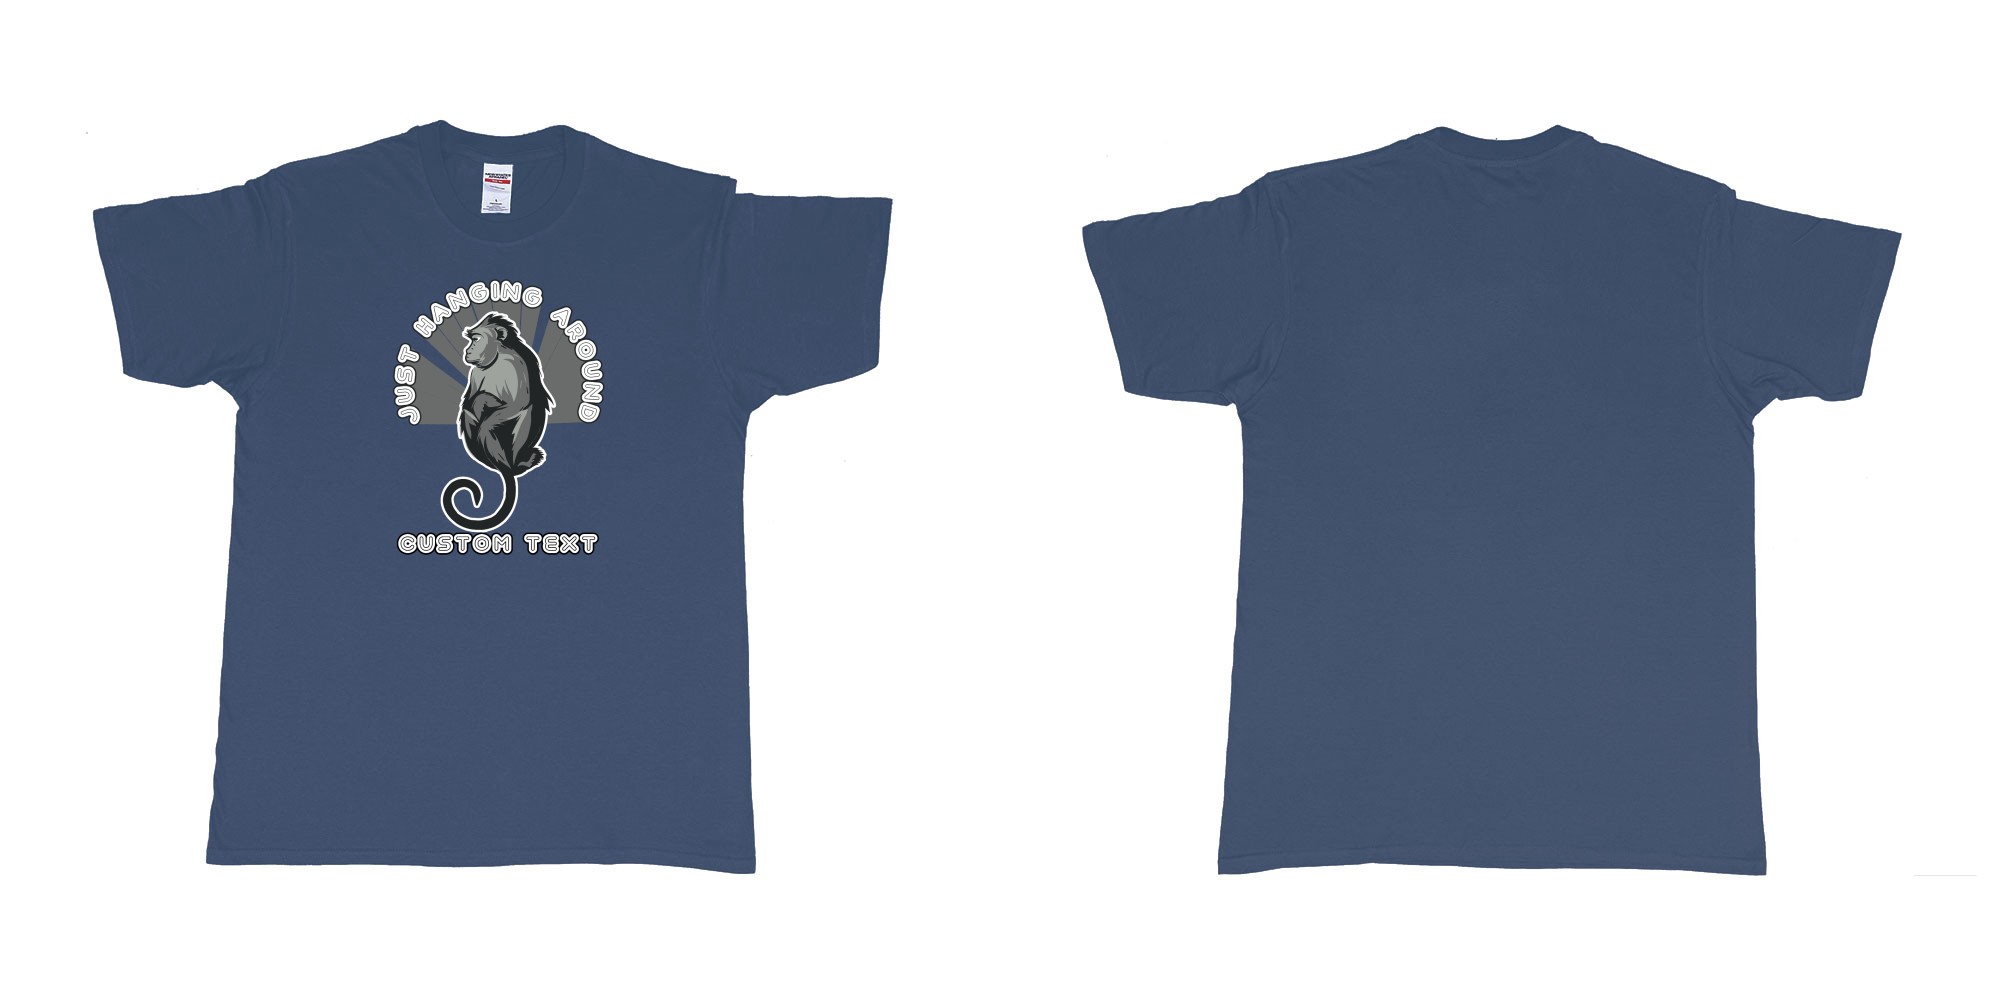 Custom tshirt design just hanging around monkey in fabric color navy choice your own text made in Bali by The Pirate Way